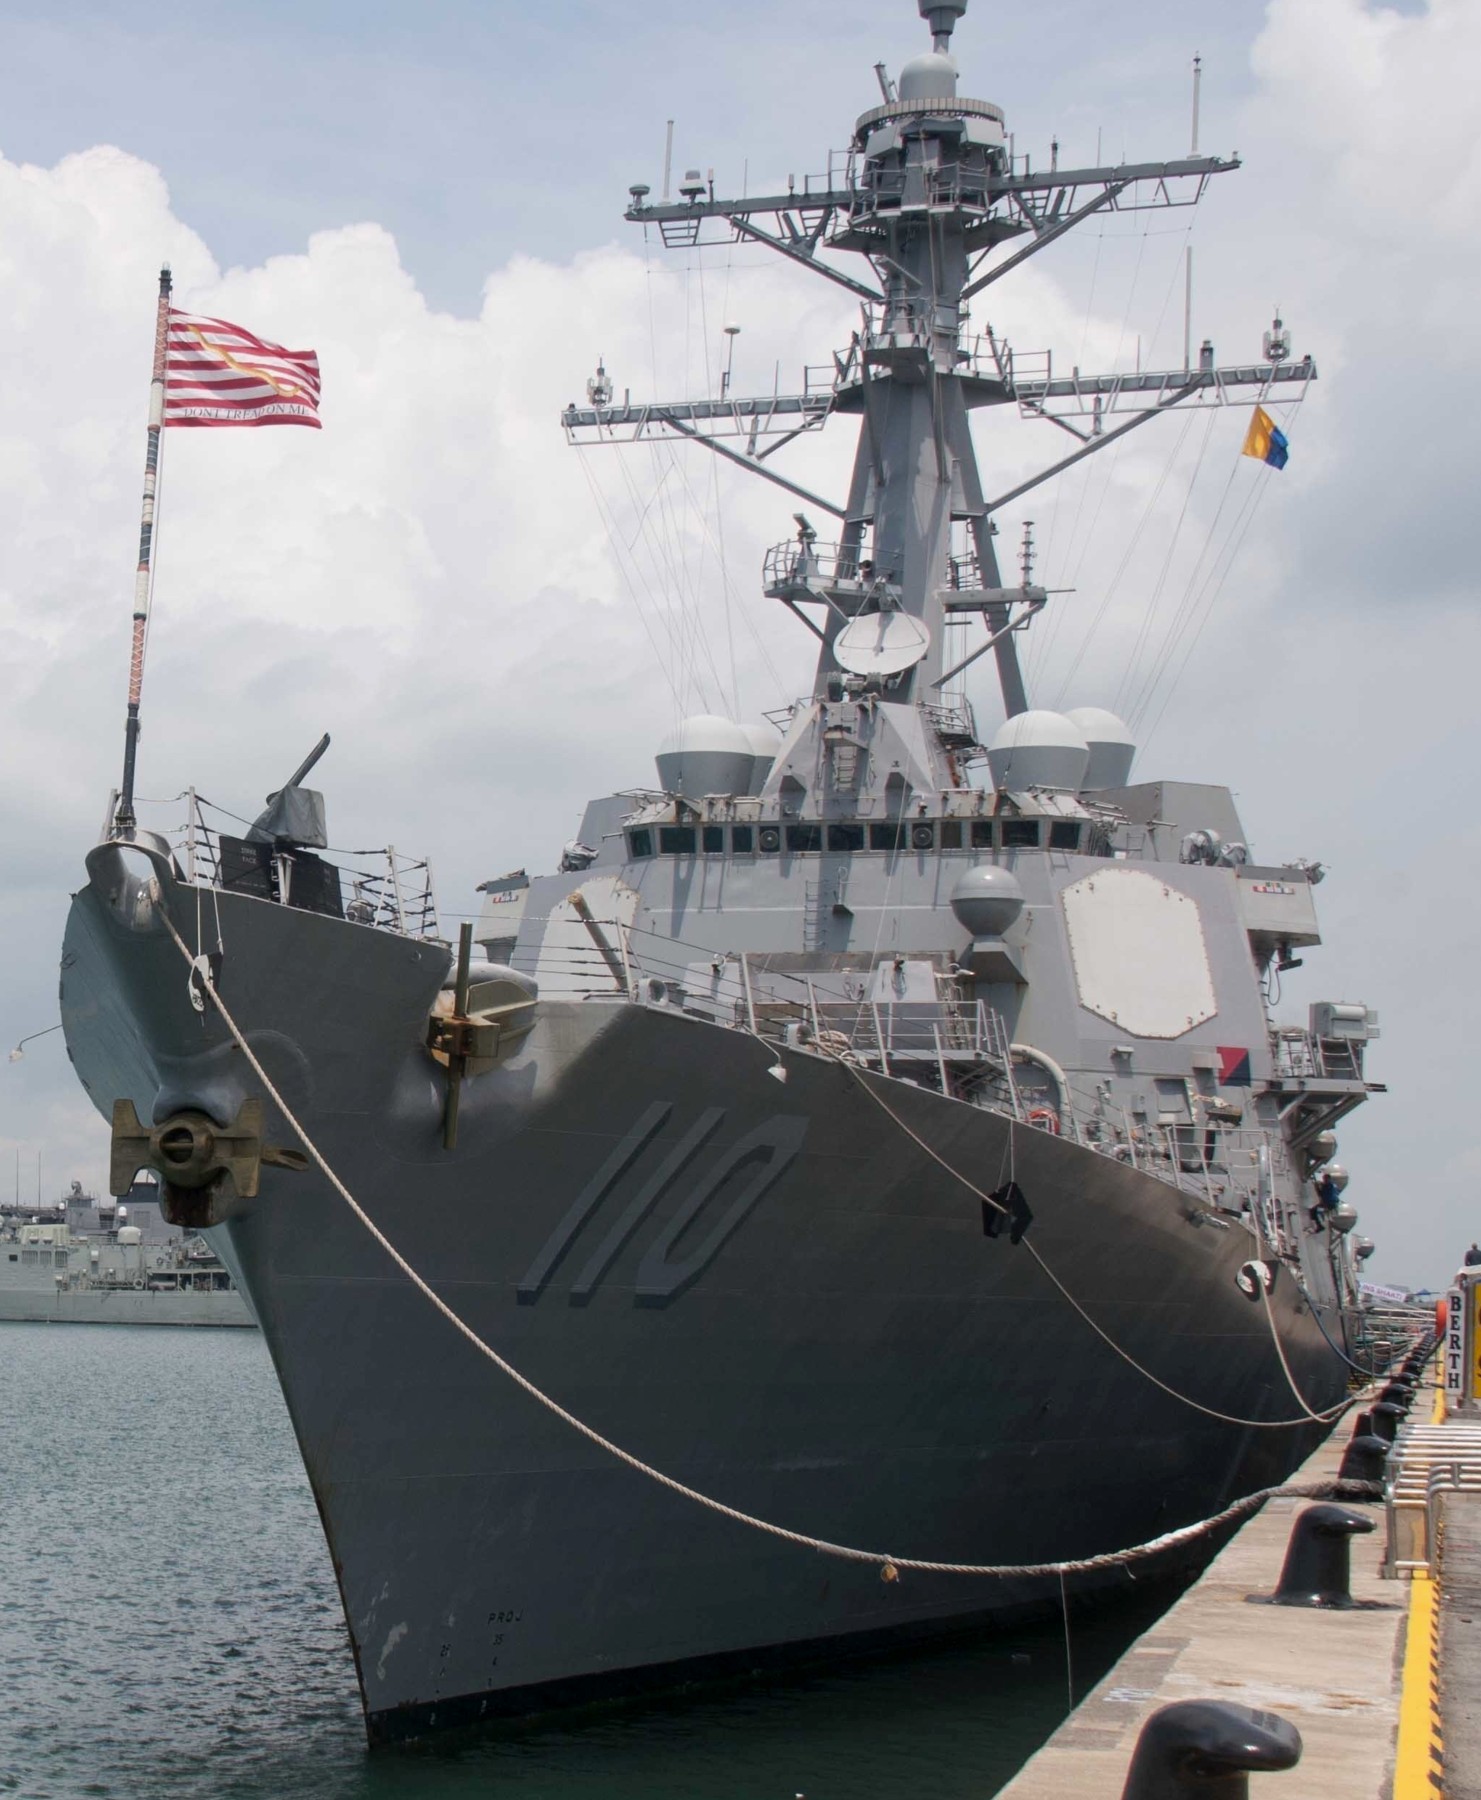 ddg-110 uss william p. lawrence arleigh burke class guided missile destroyer aegis us navy changi naval base singapore 45